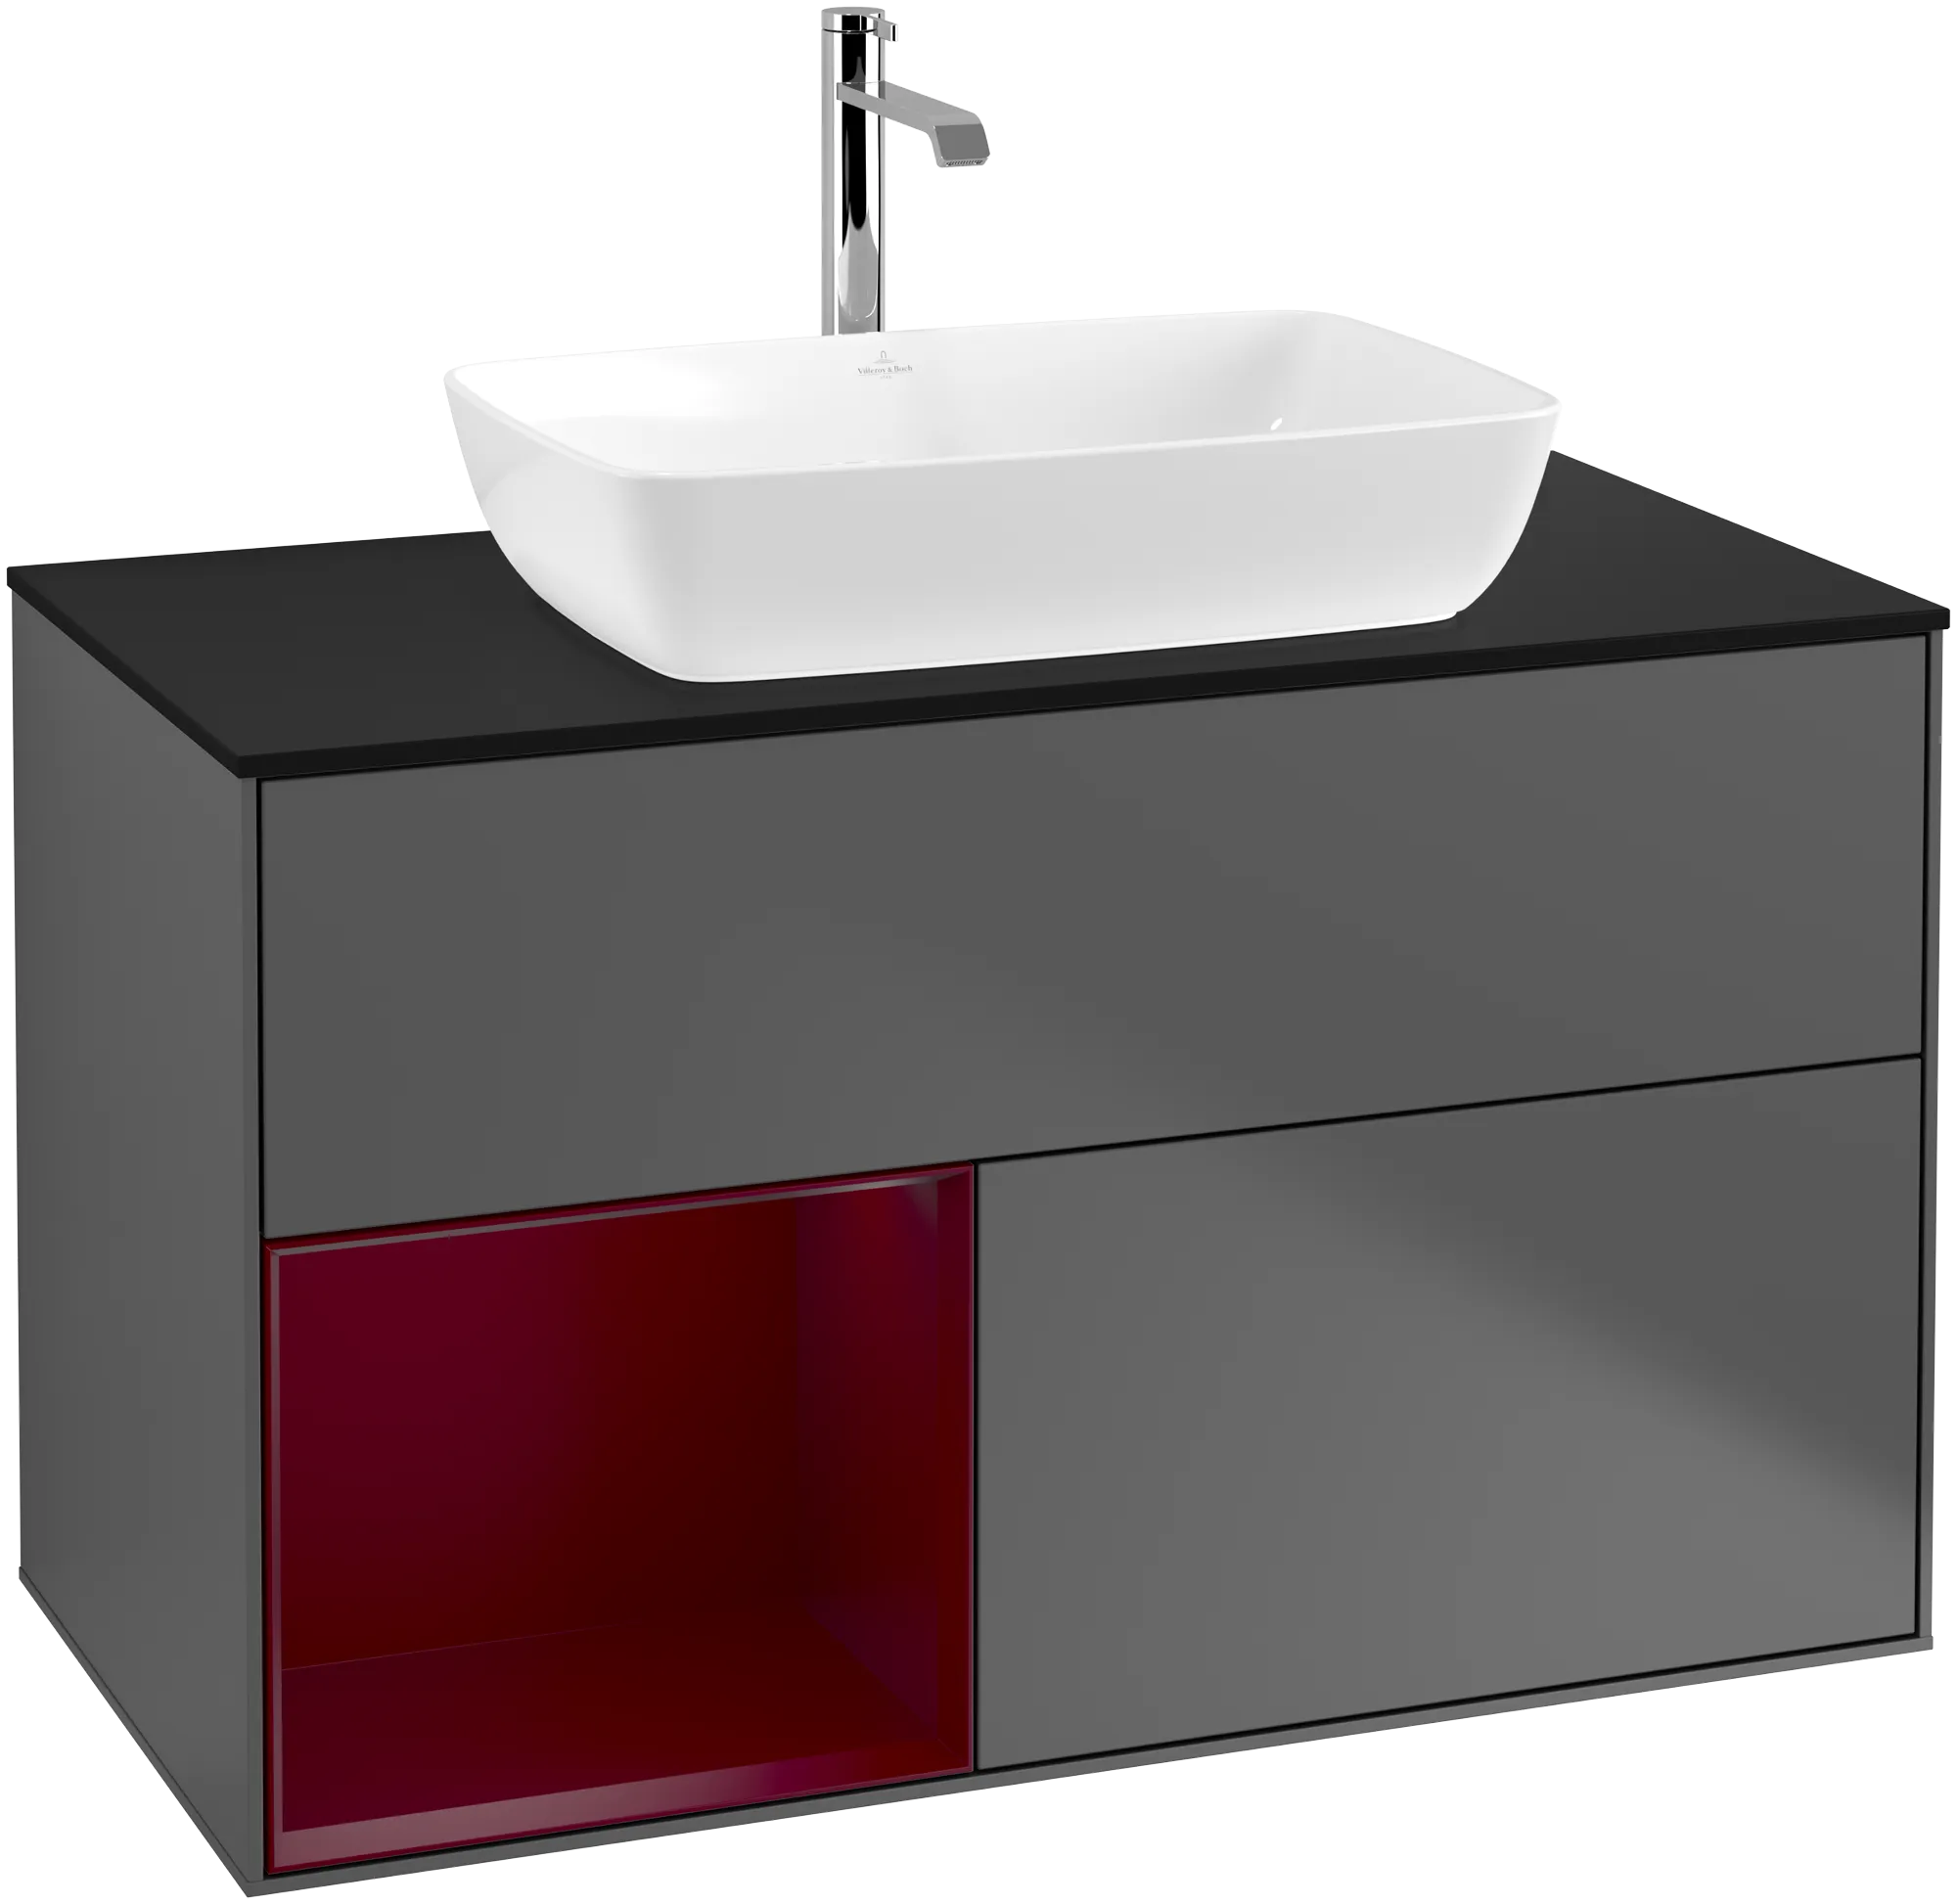 VILLEROY BOCH Finion Vanity unit, with lighting, 2 pull-out compartments, 1000 x 603 x 501 mm, Anthracite Matt Lacquer / Peony Matt Lacquer / Glass Black Matt #G772HBGK resmi